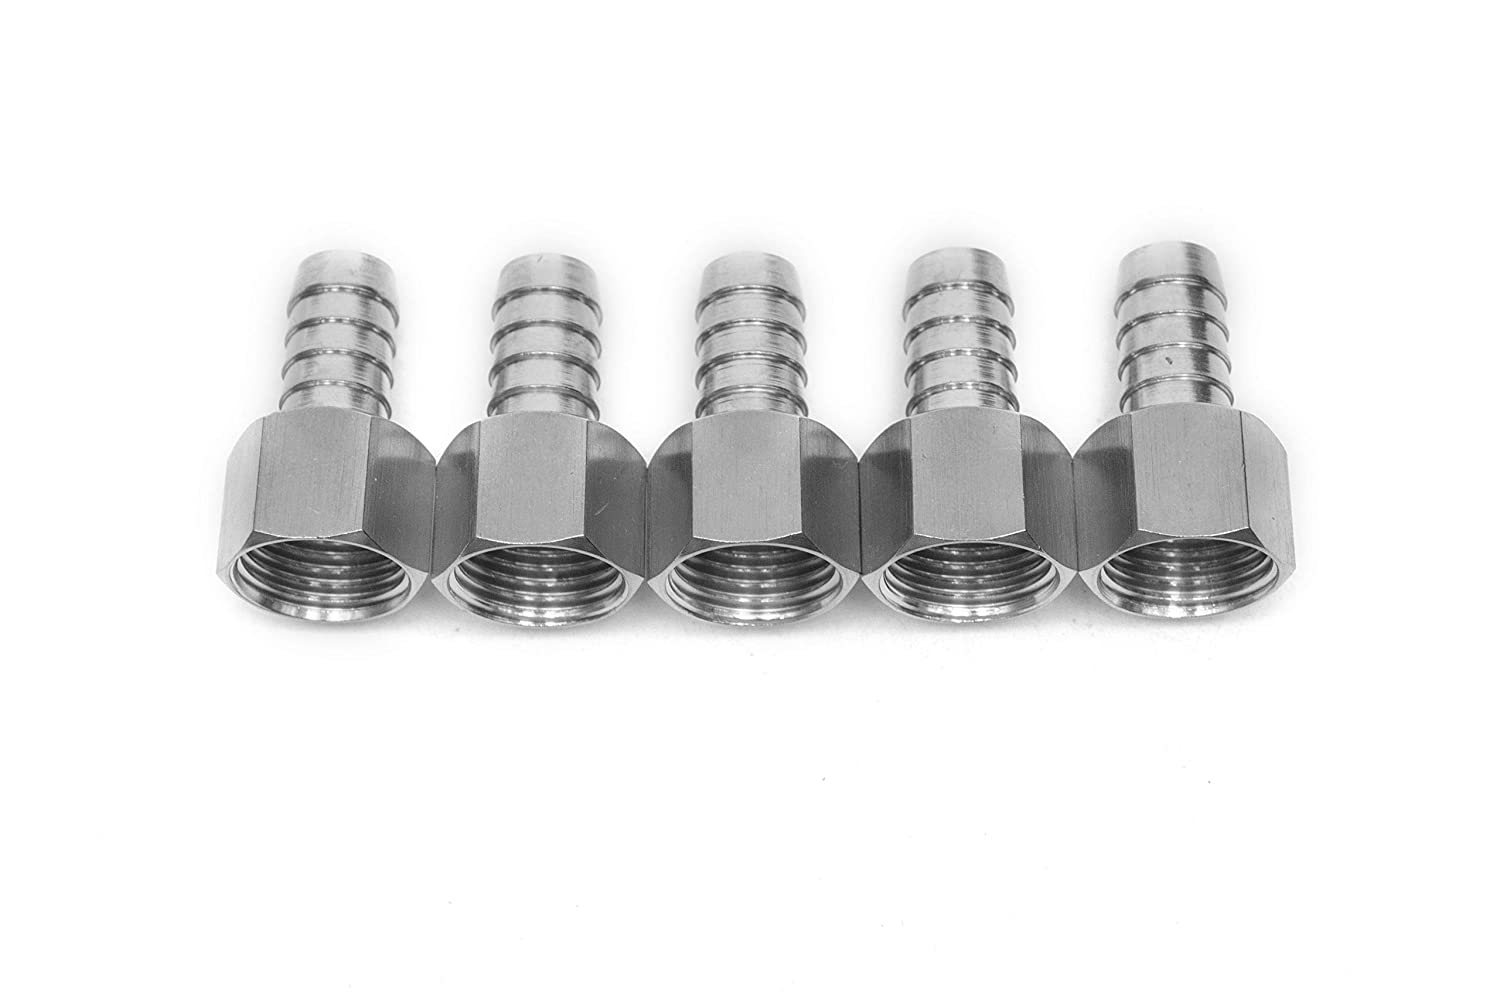 LTWFITTING Bar Production Stainless Steel 316 Barb Fitting Coupler 1/2 Inch Hose ID x 1/2 Inch Female NPT Air Fuel Water (Pack of 5)